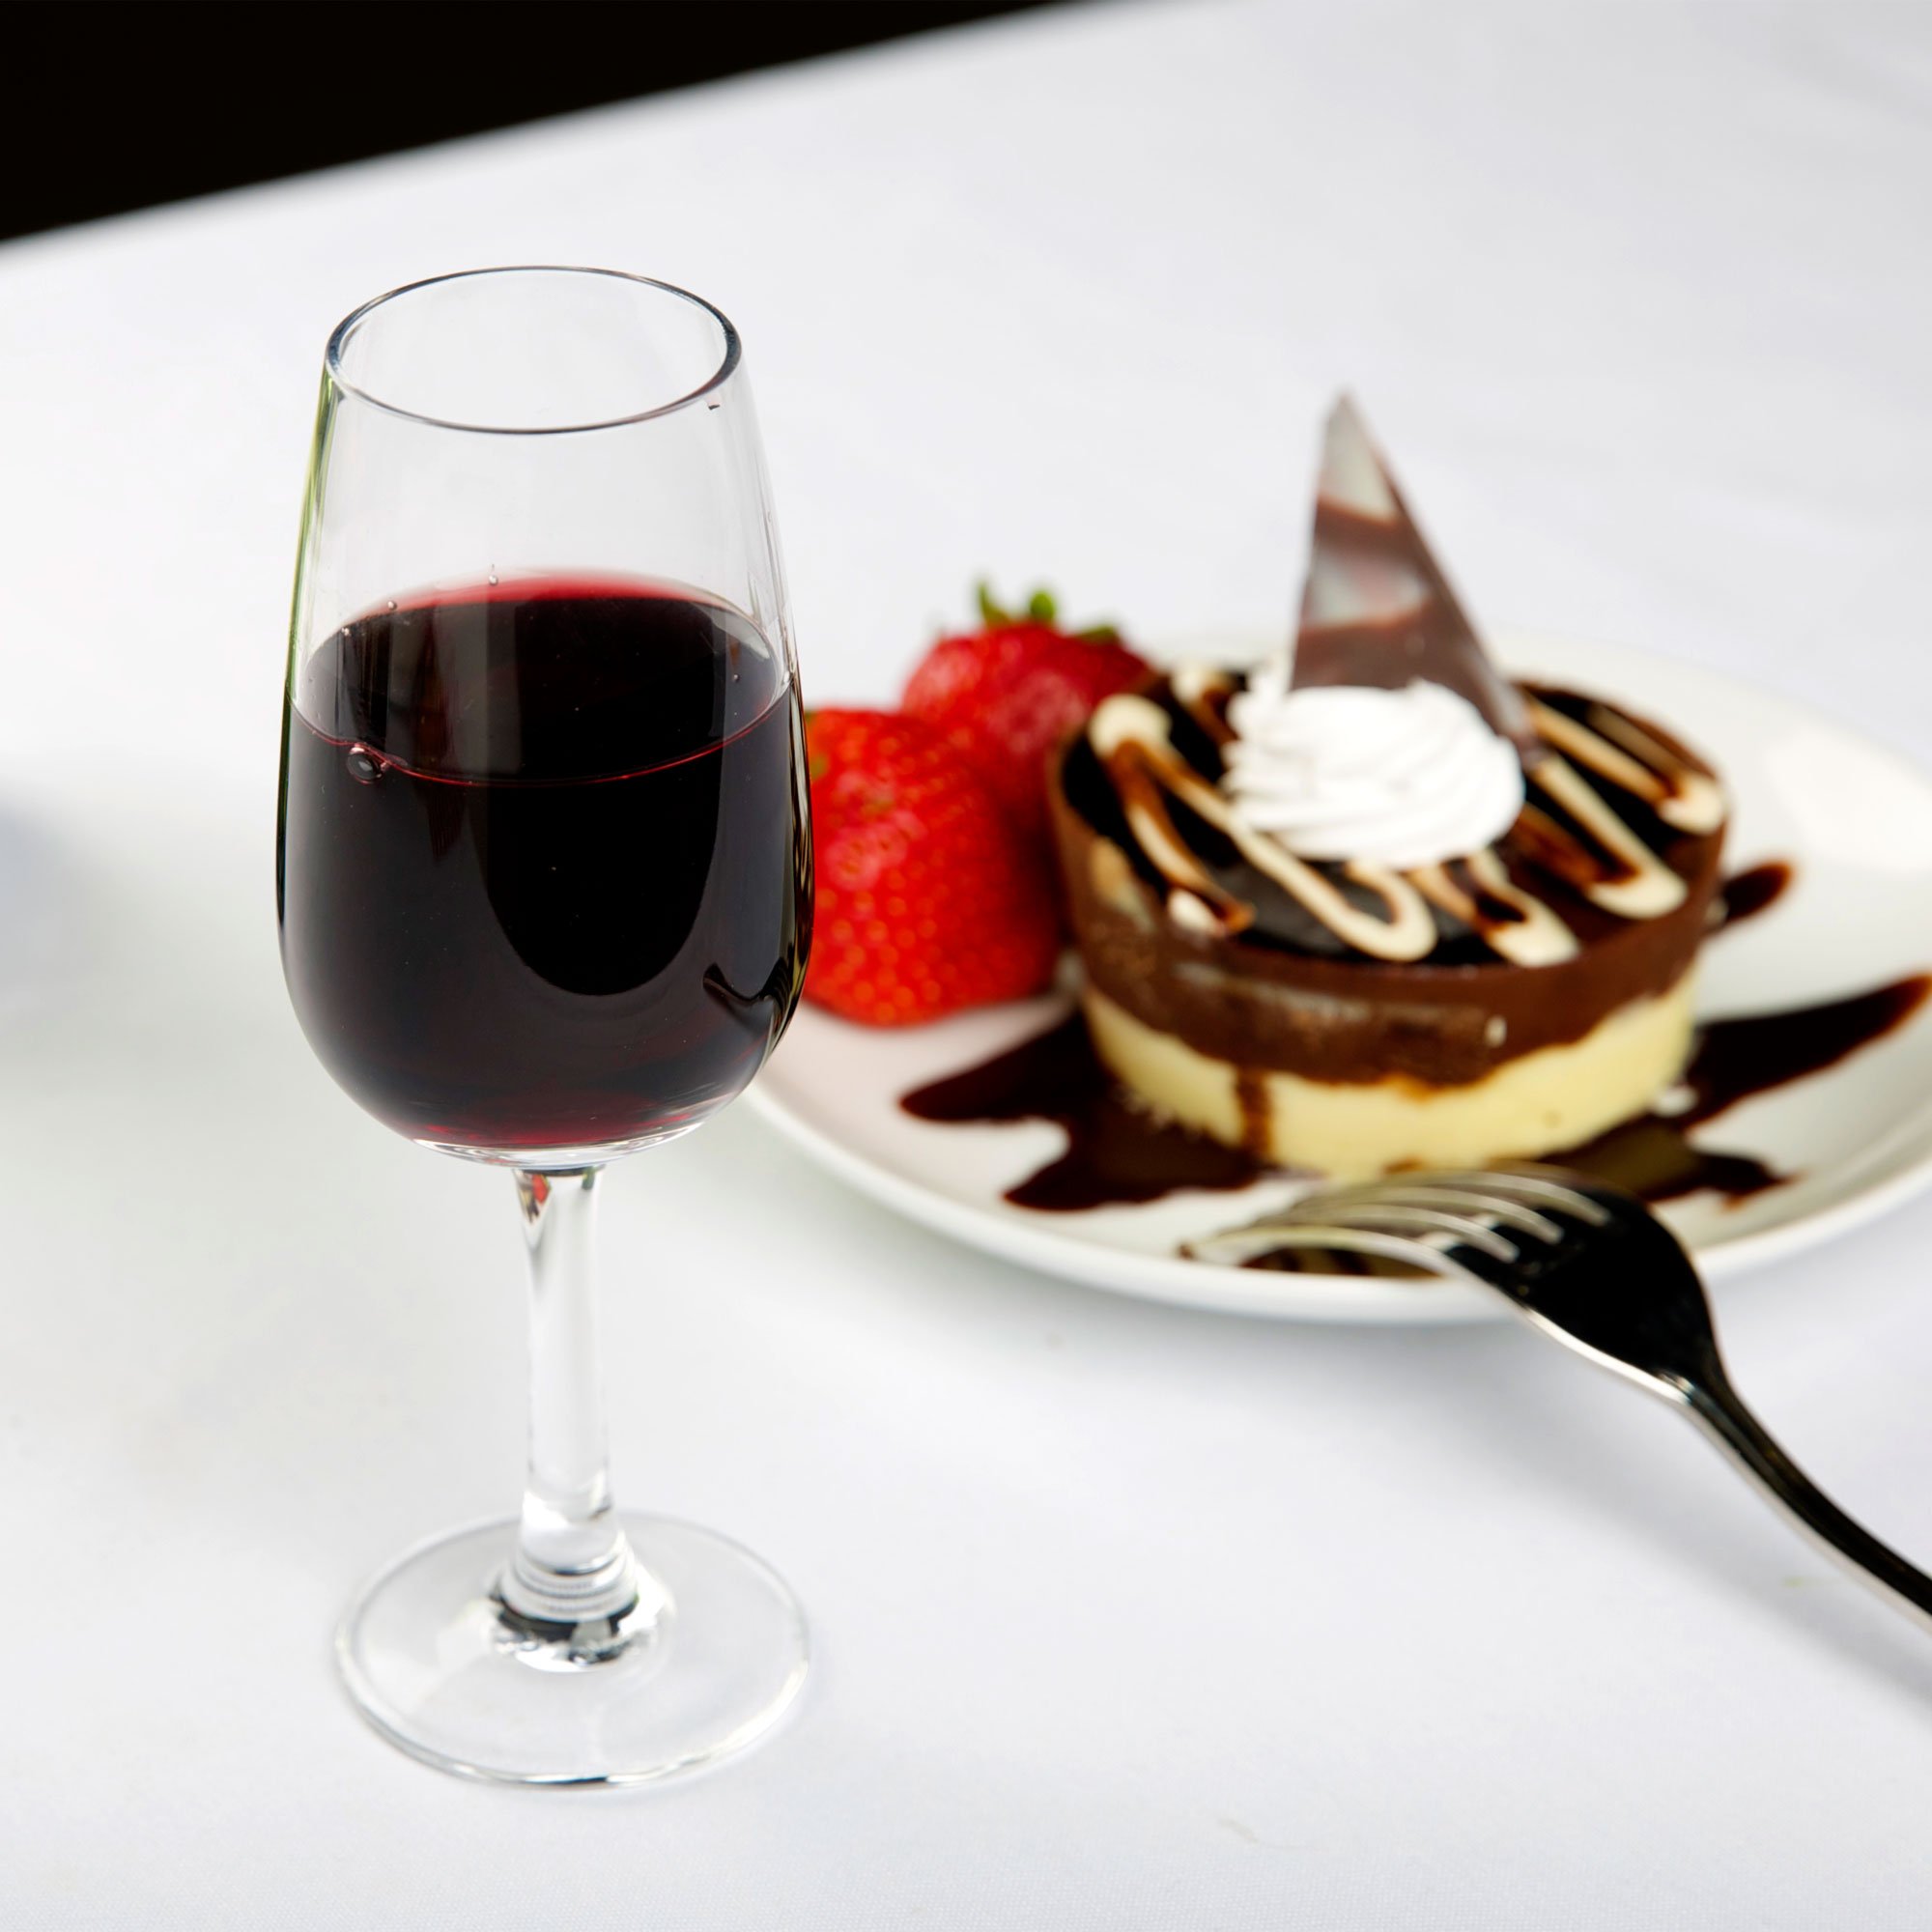 Dessert wine glass filled with port in front of an elegant dessert, complete with fresh strawberries